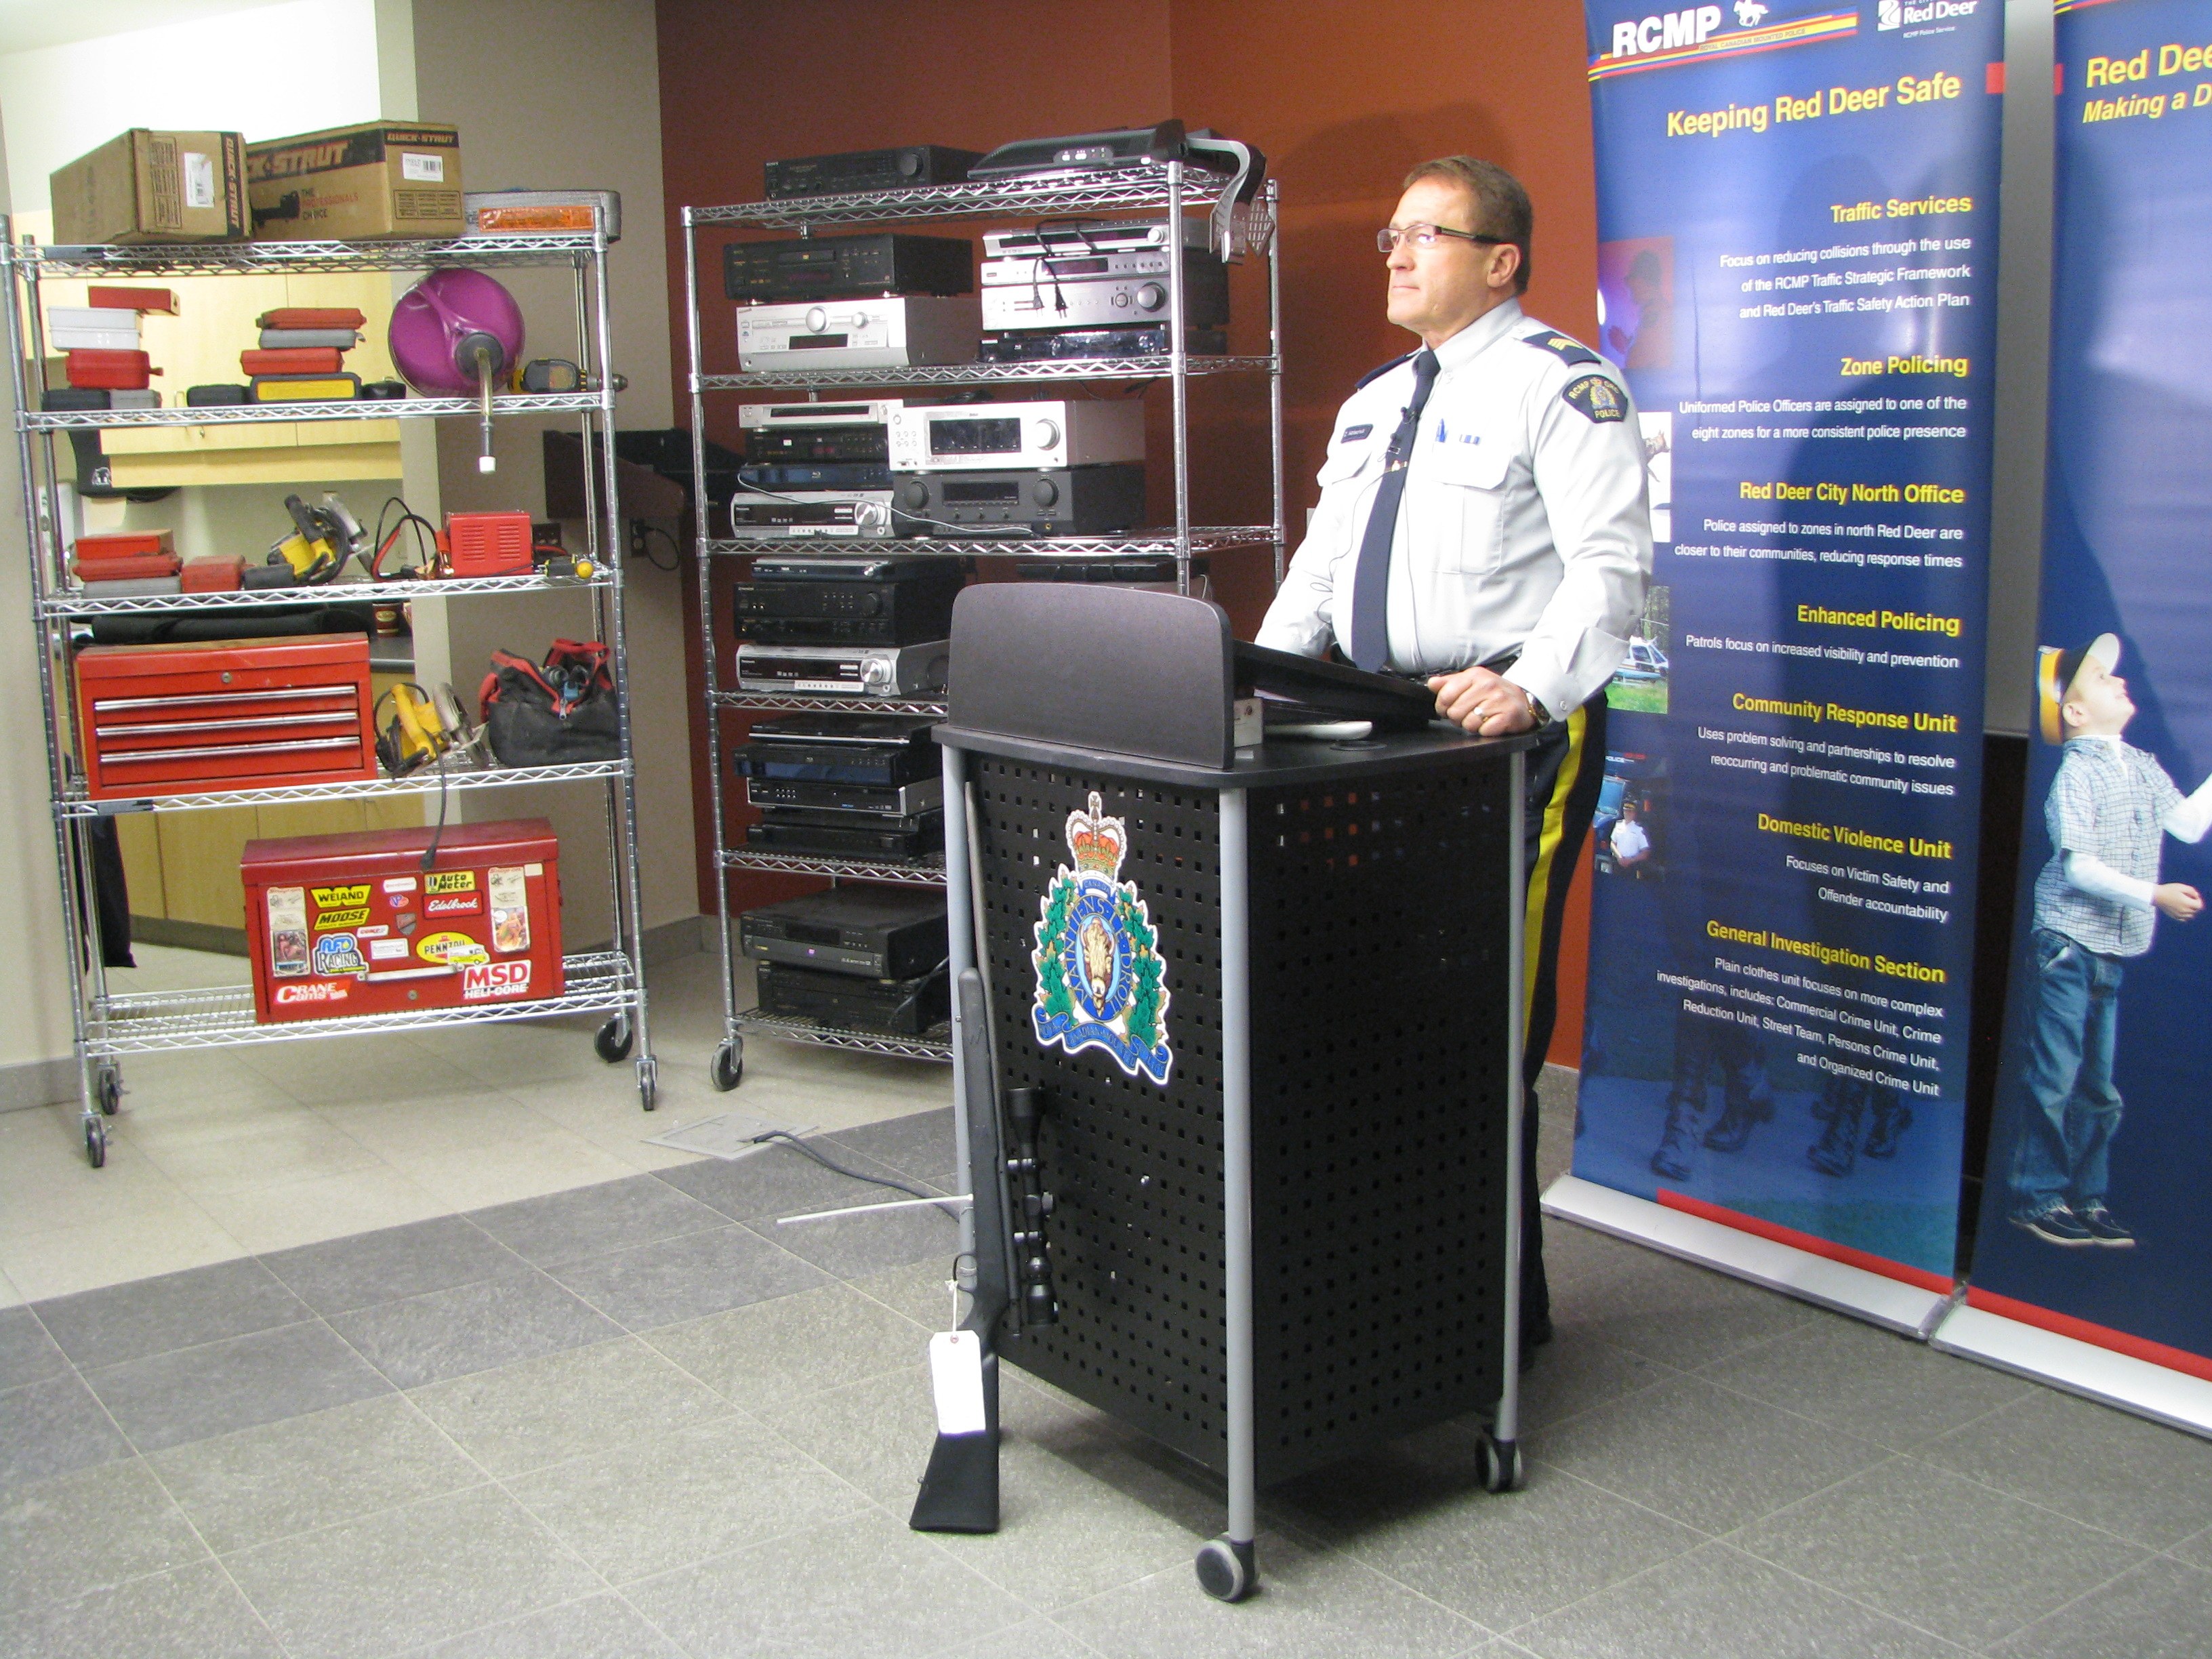 SEIZURE – Staff Sgt. Chris Matechuk of the Innisfail RCMP speaks during a press conference last week held at the downtown RCMP detachment regarding an investigation that led to the seizure of a large amount of stolen property. Displayed behind Matechuk are a number of items that were seized from a Penhold home. Gary Raymond Auvigne has been charged.